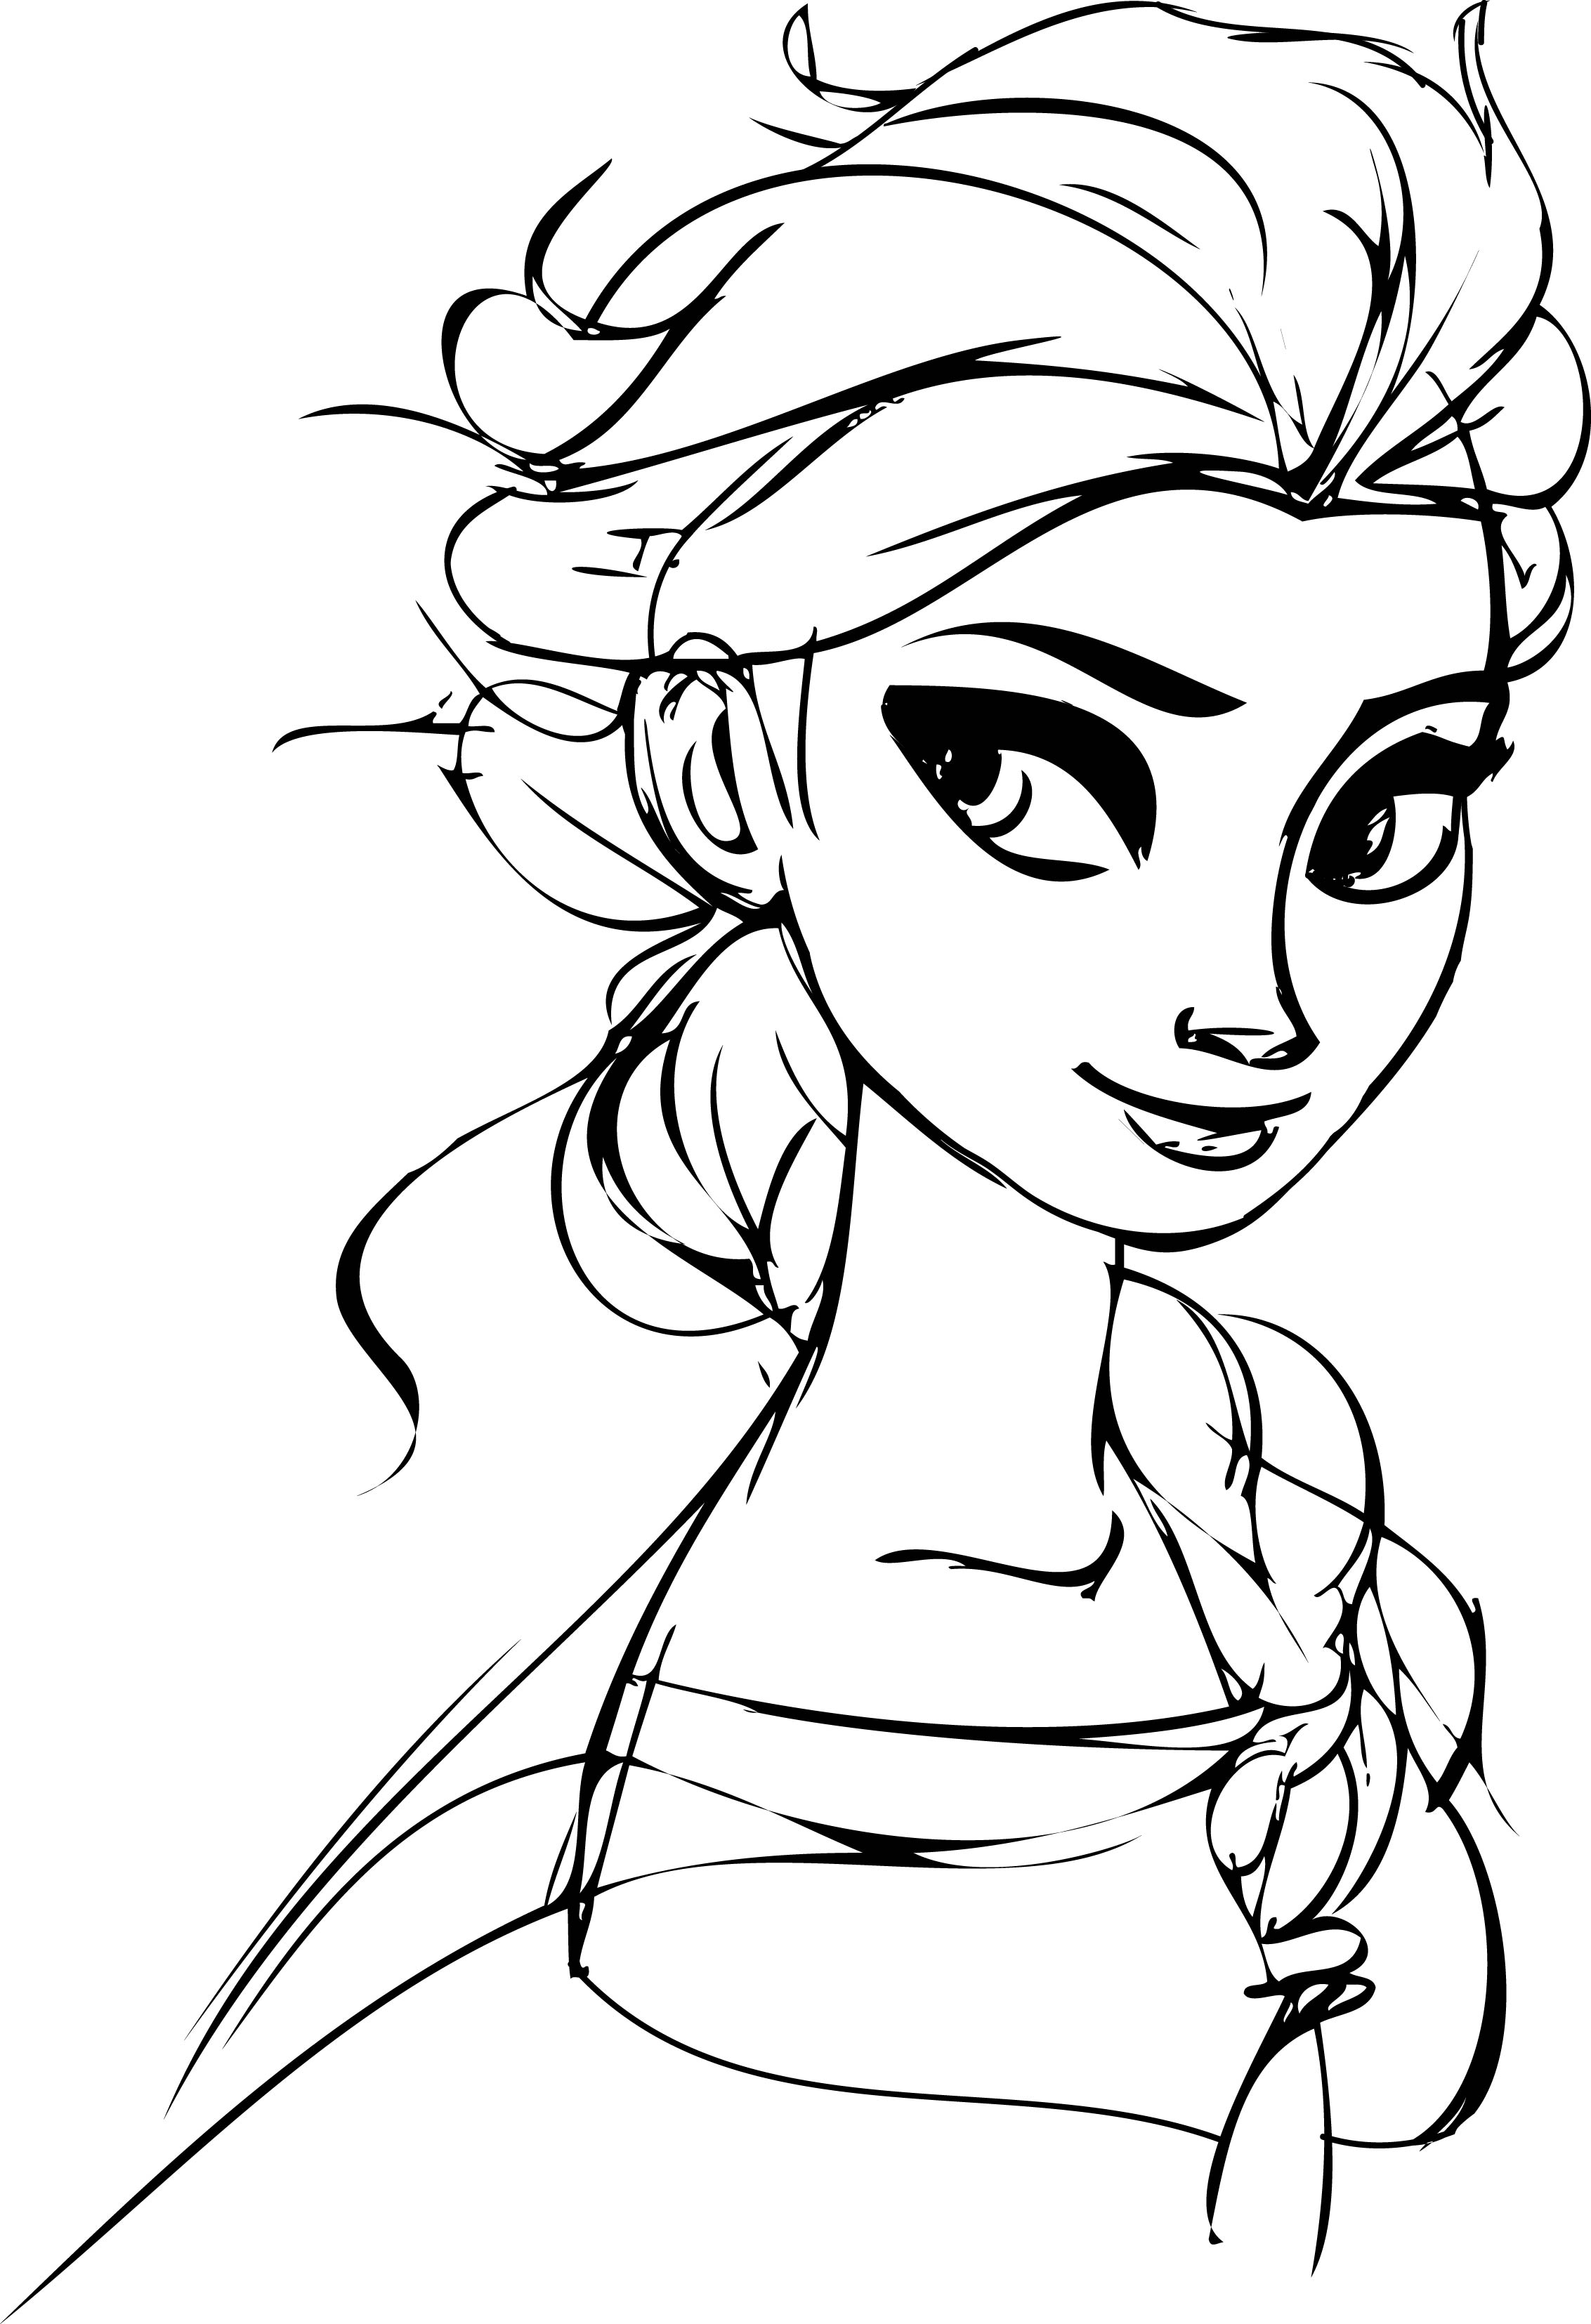 Elsa Frozen Coloring Page at GetColorings.com | Free ...